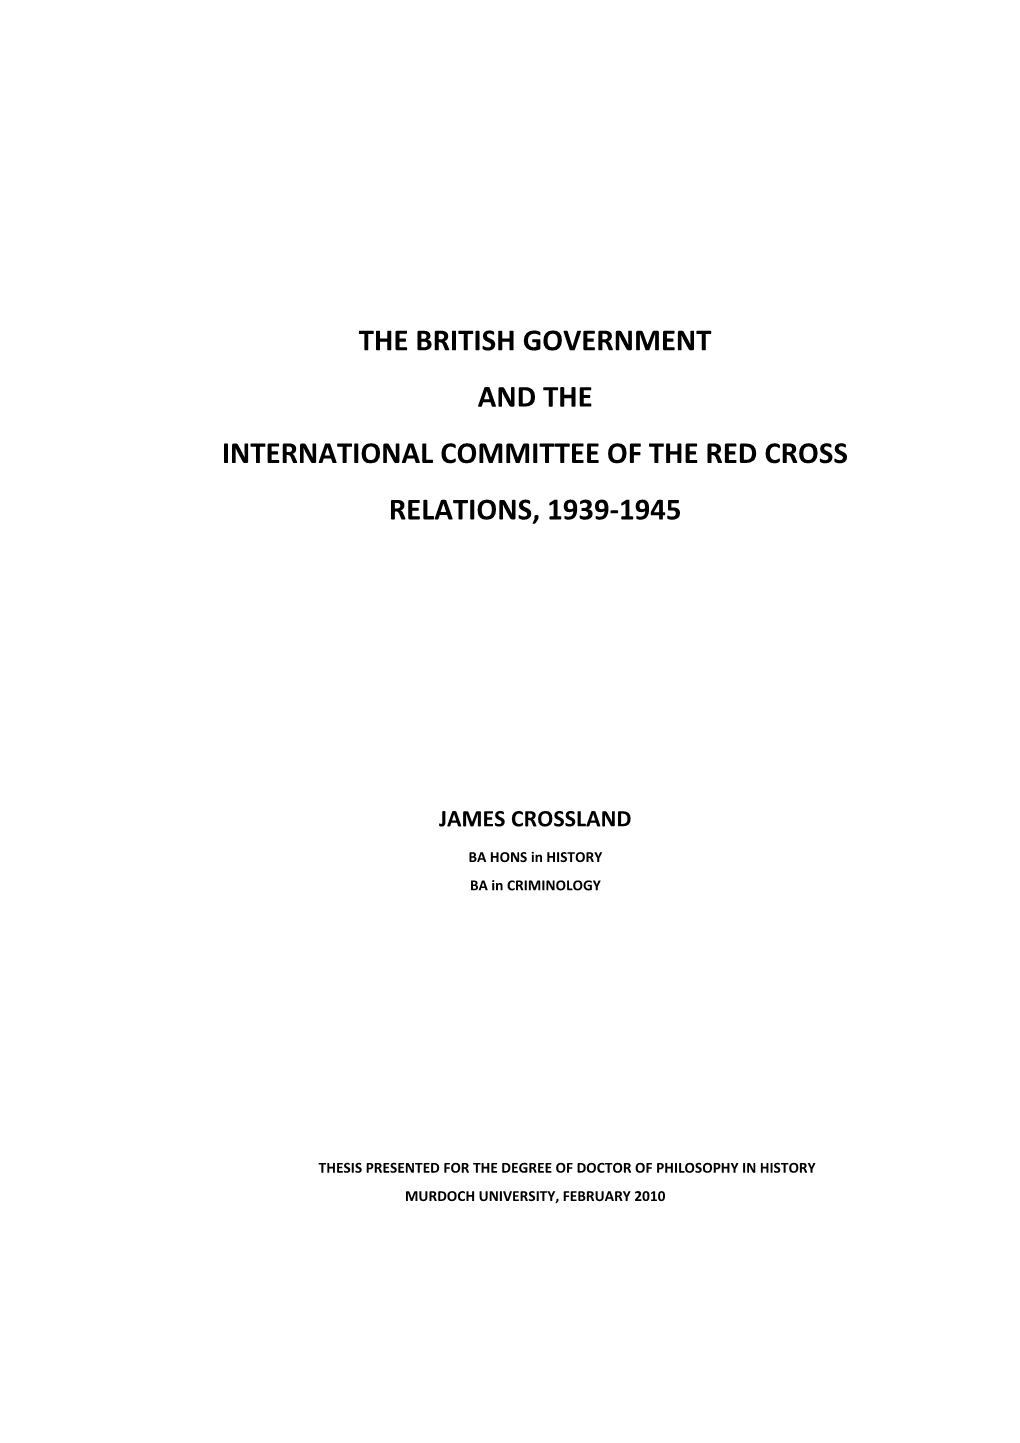 The British Government and the International Committee of the Red Cross Relations, 1939-1945